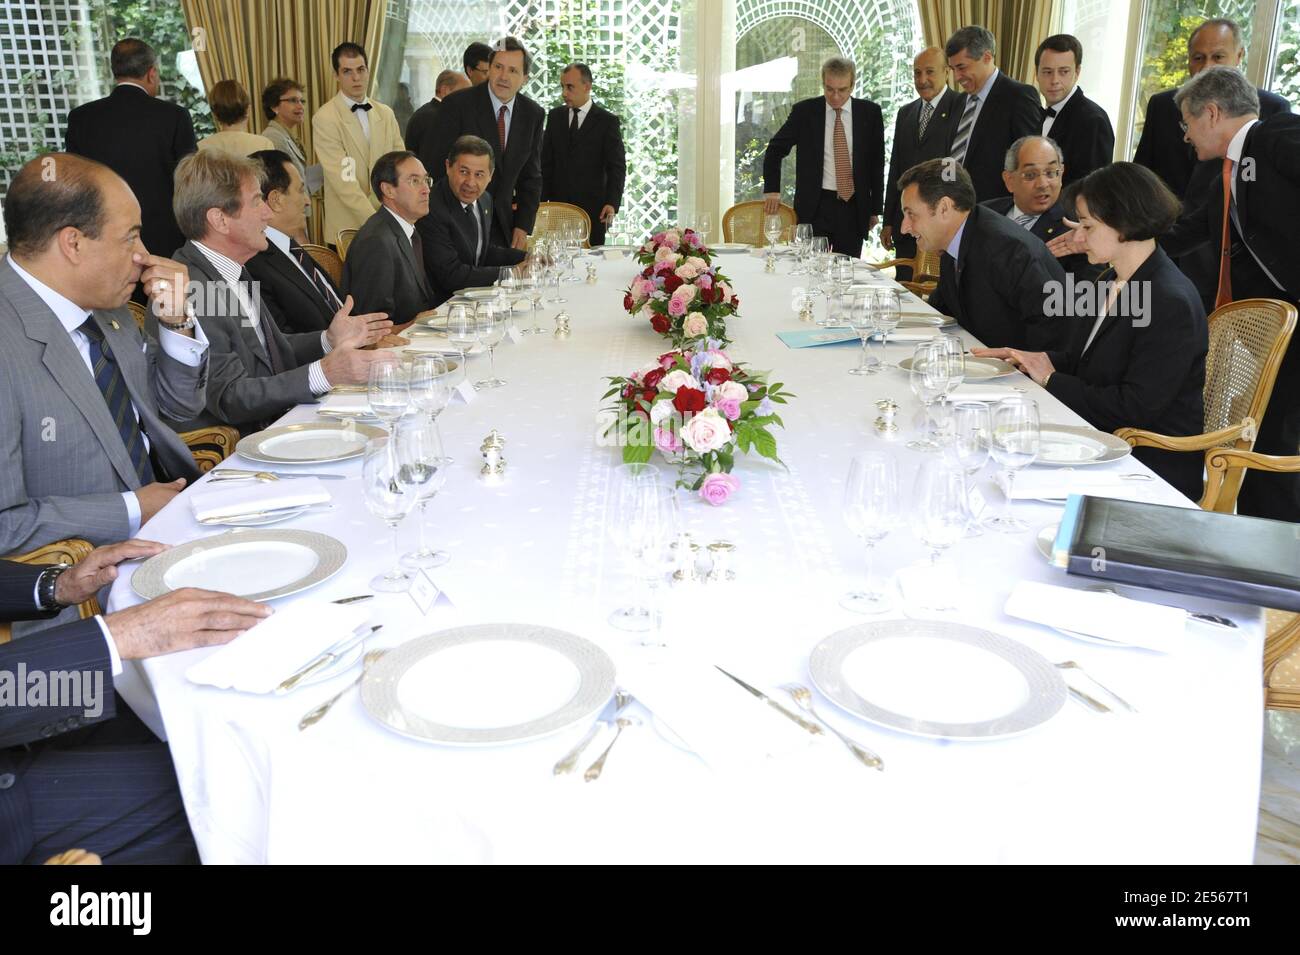 French President Nicolas Sarkozy and his Egyptian counterpart Muhammad Hosni Mubarak lunch flanked by Bernard Kouchner, Claude Gueant, Henri Guaino and Jean-David Levitte at Le Bristol in Paris, France on July 12, 2008. Photo by Elodie Gregoire/ABACAPRESS.COM Stock Photo